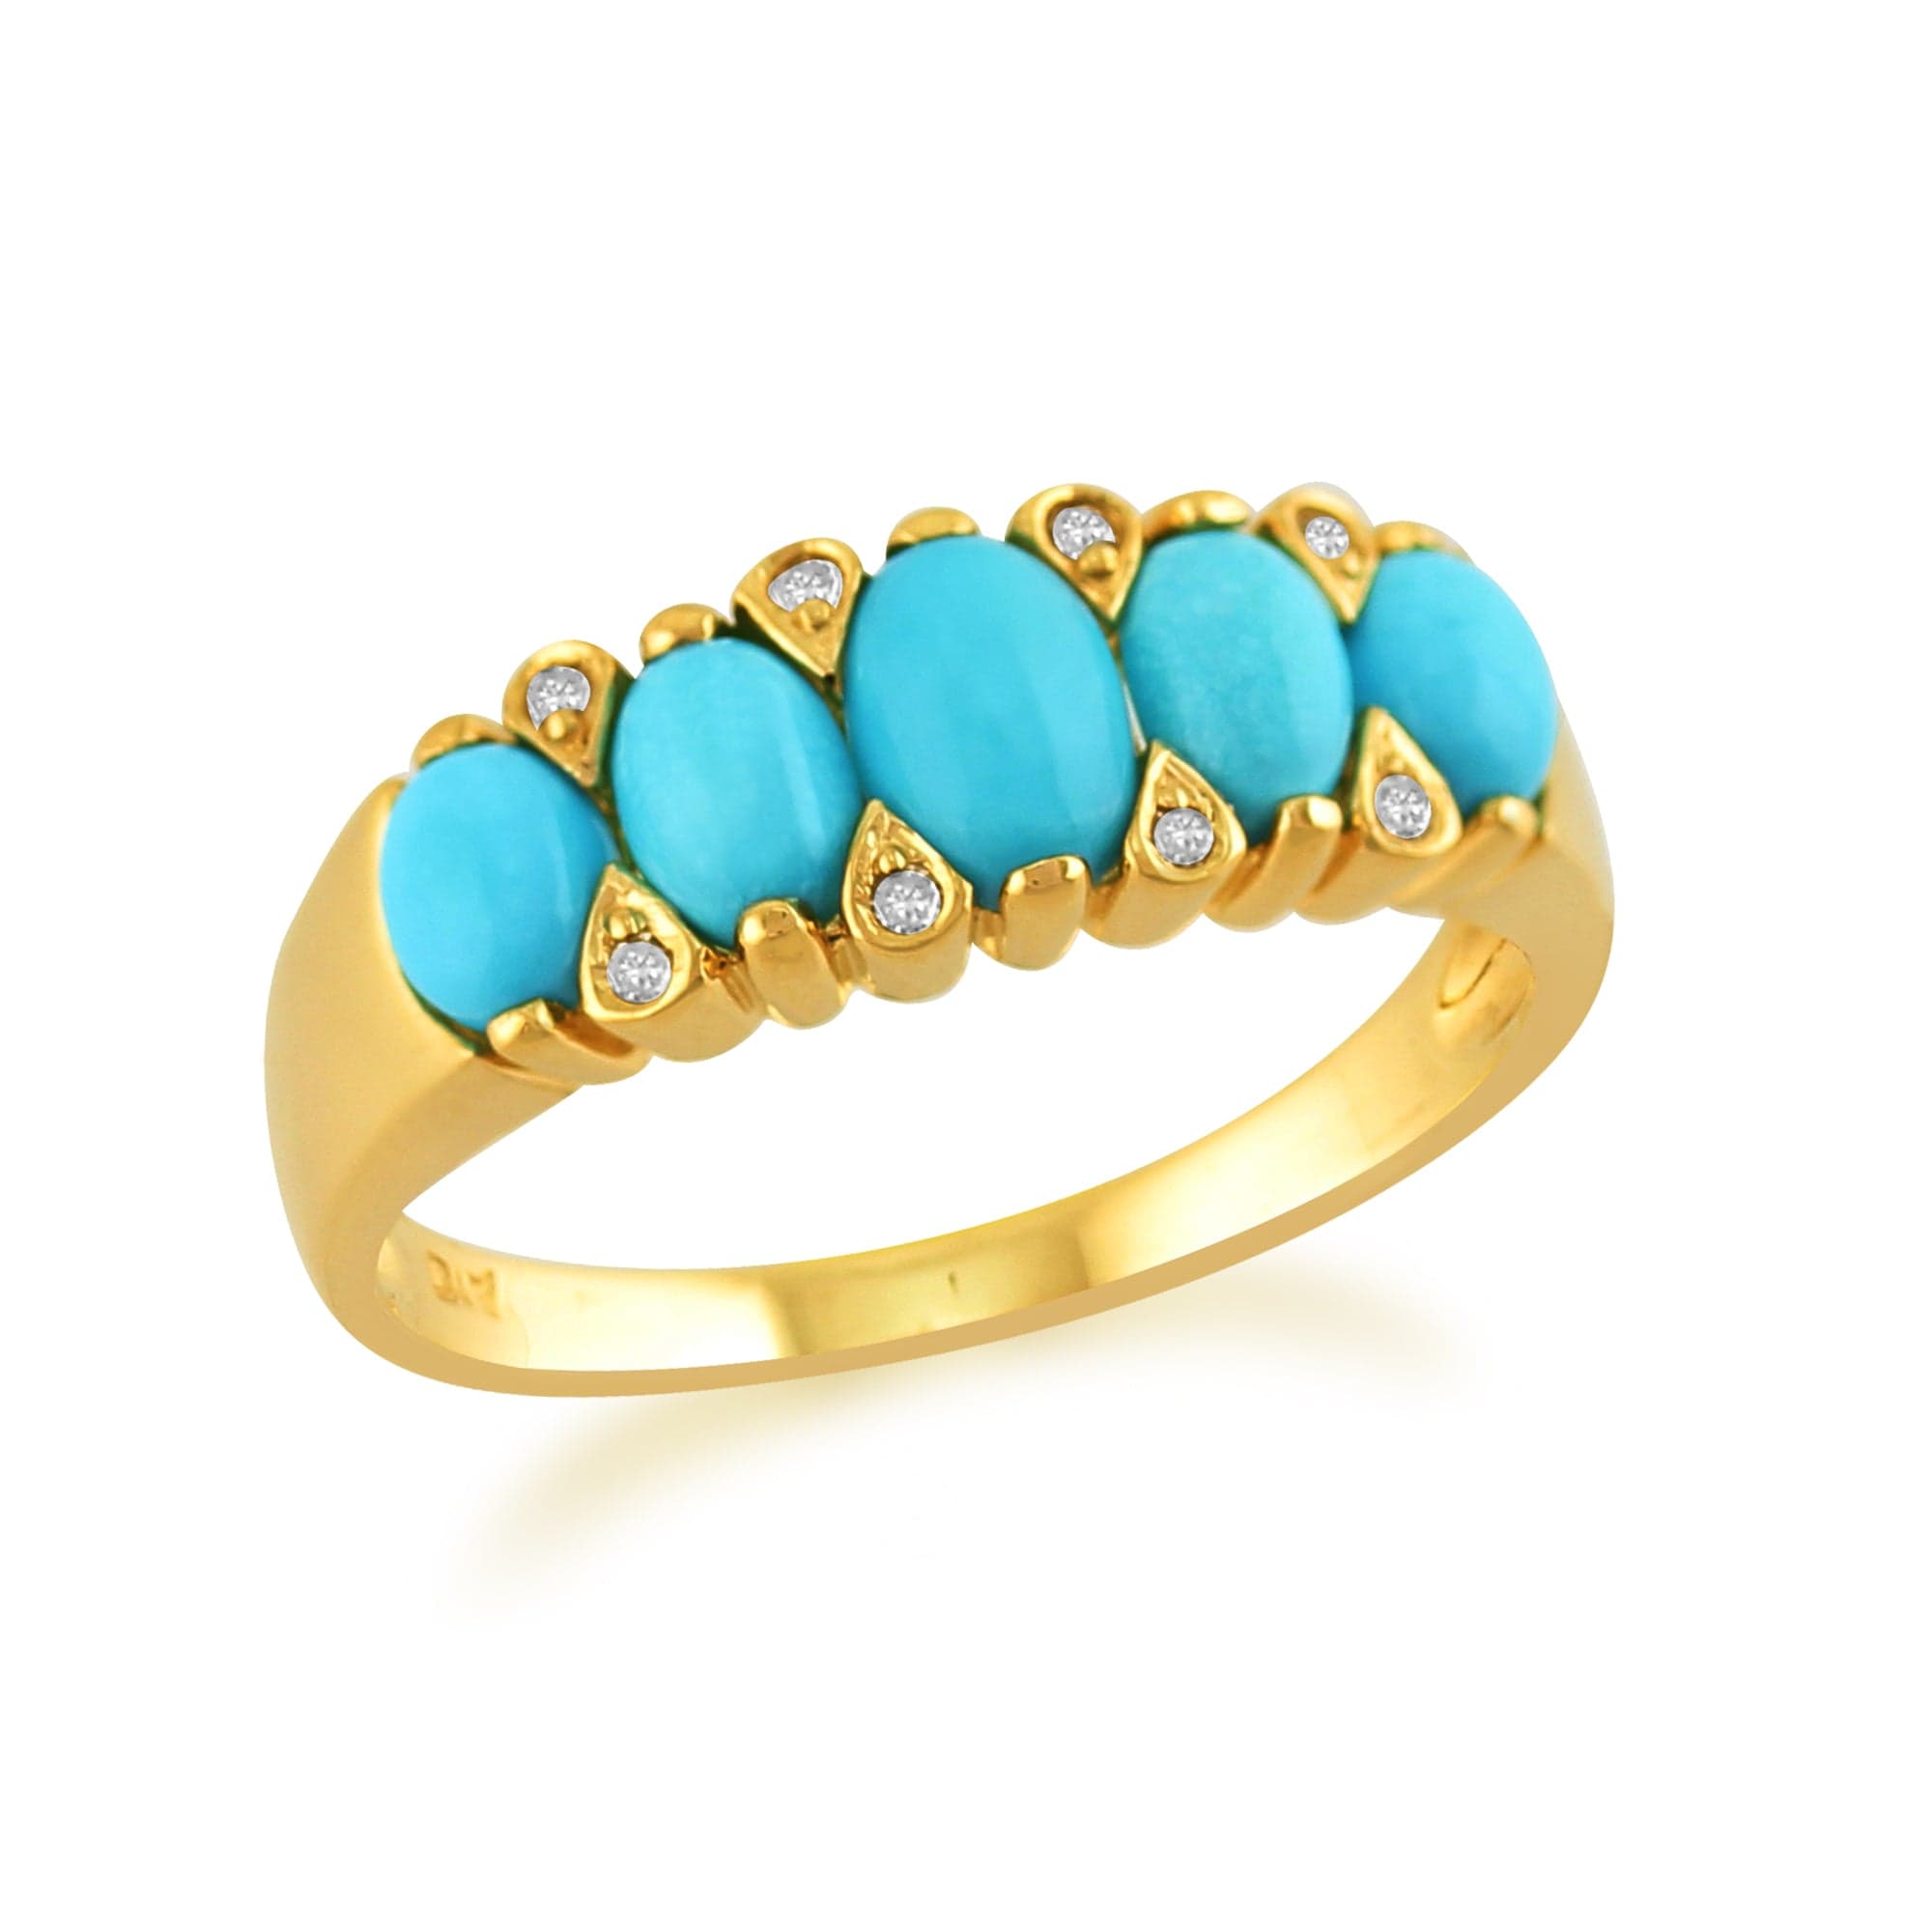 25394 9ct Yellow Gold 1.40ct Turquoise Cabochon & Diamond Five Stone Ring 2